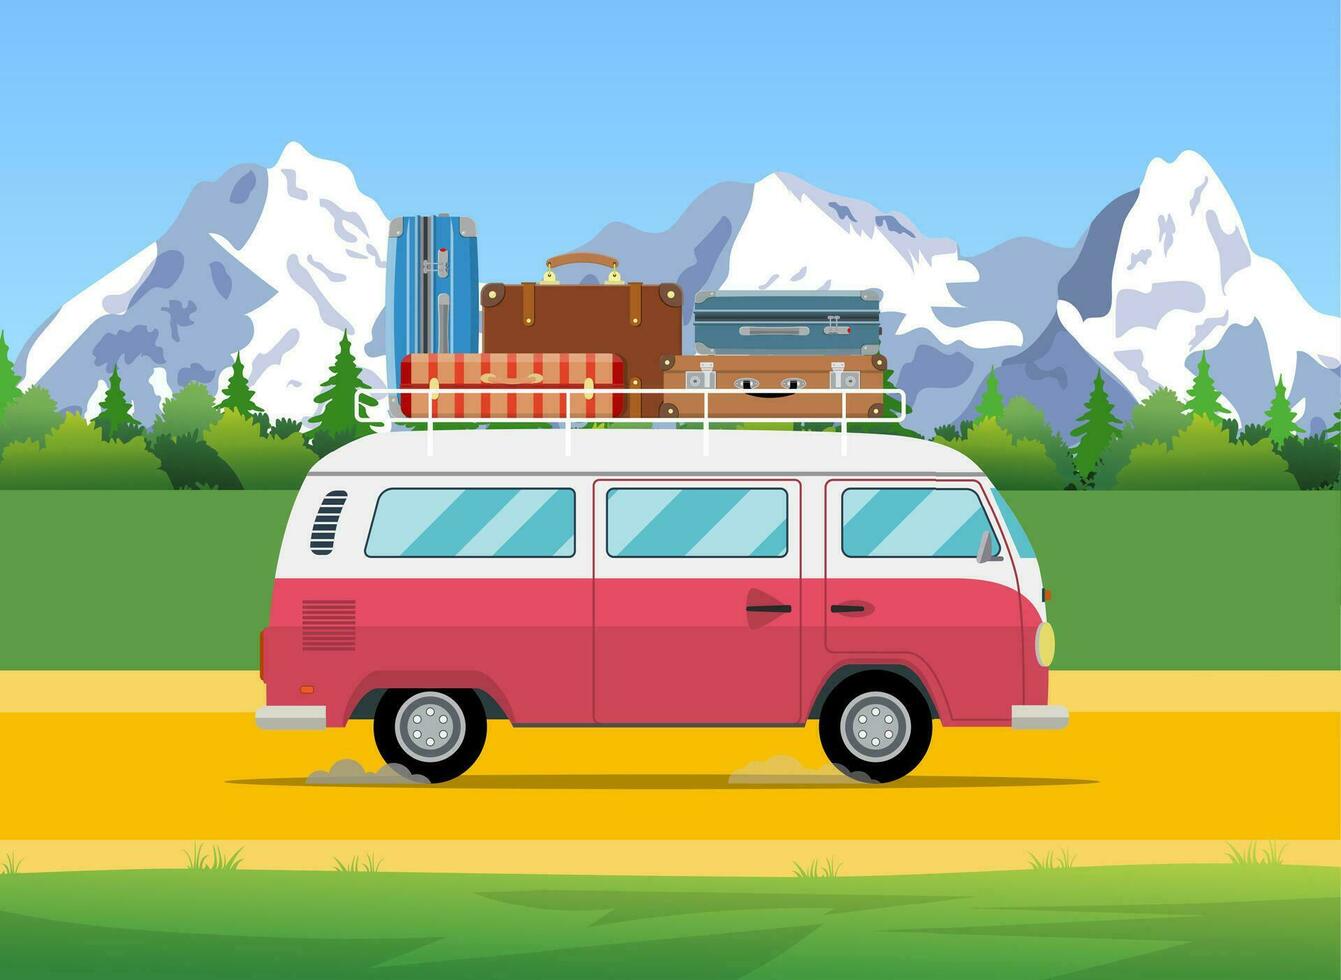 web banner on the theme of Road trip, vector